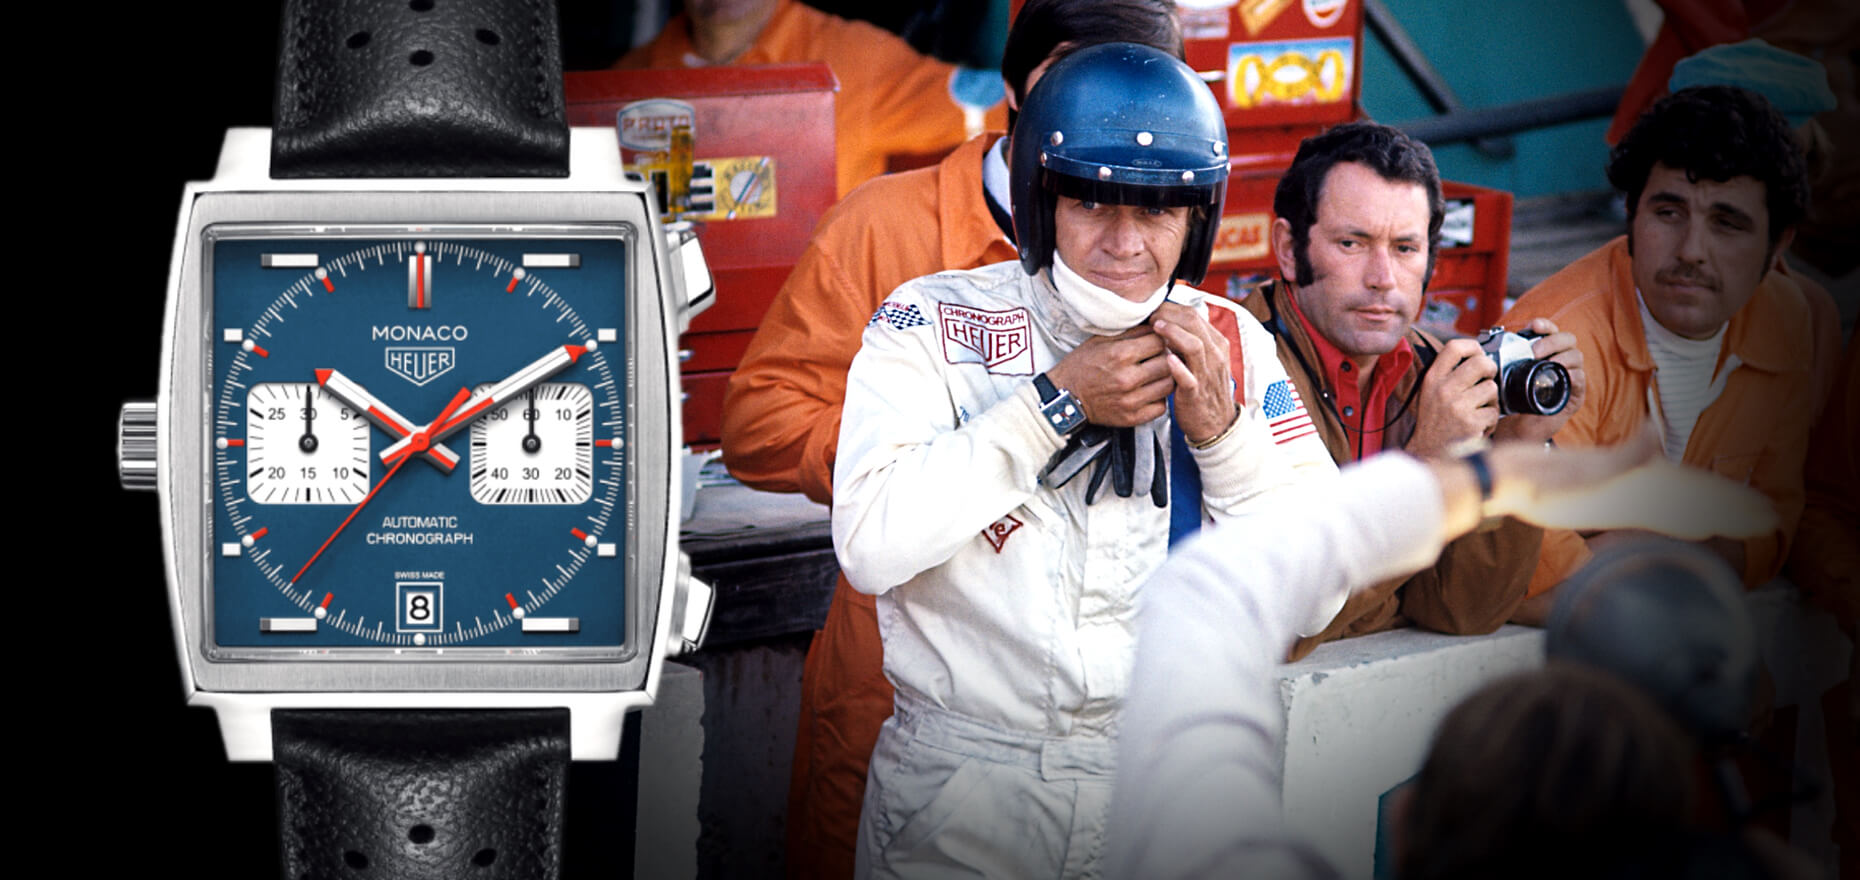 How Has TAG Heuer Bucked the Swiss Watch Downturn? - The New York